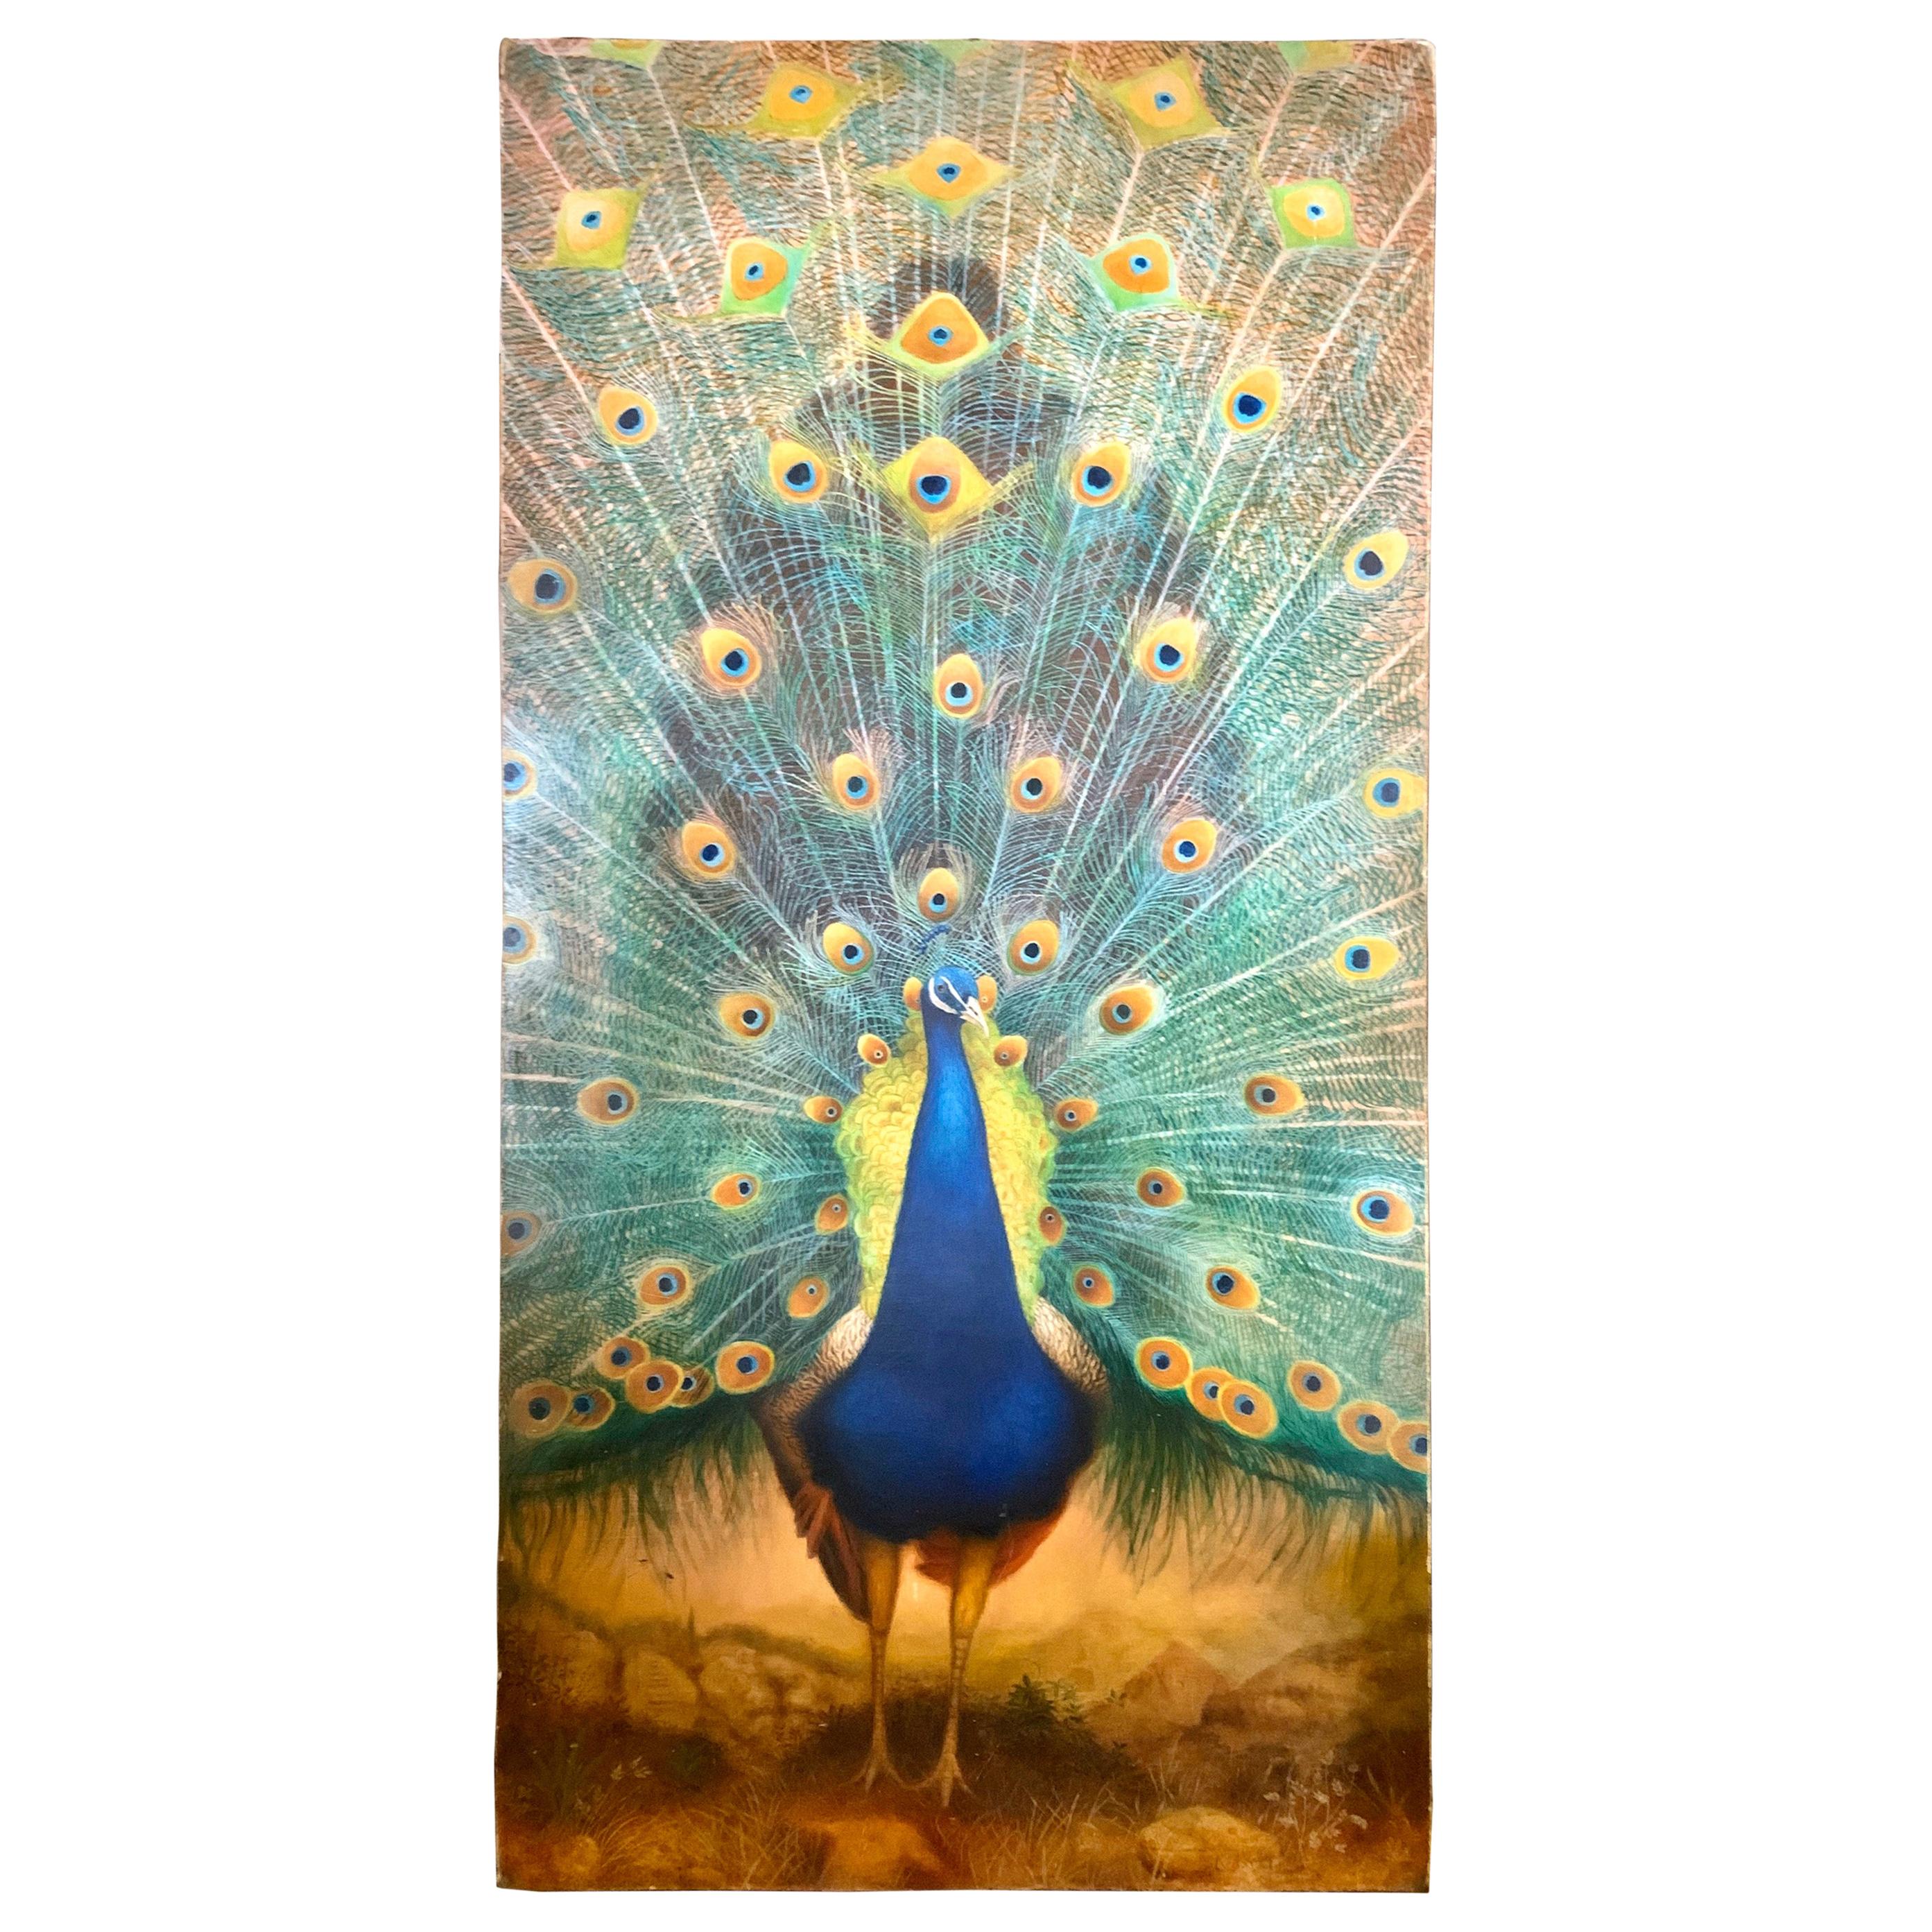 Tall Original Peacock Painting Signed